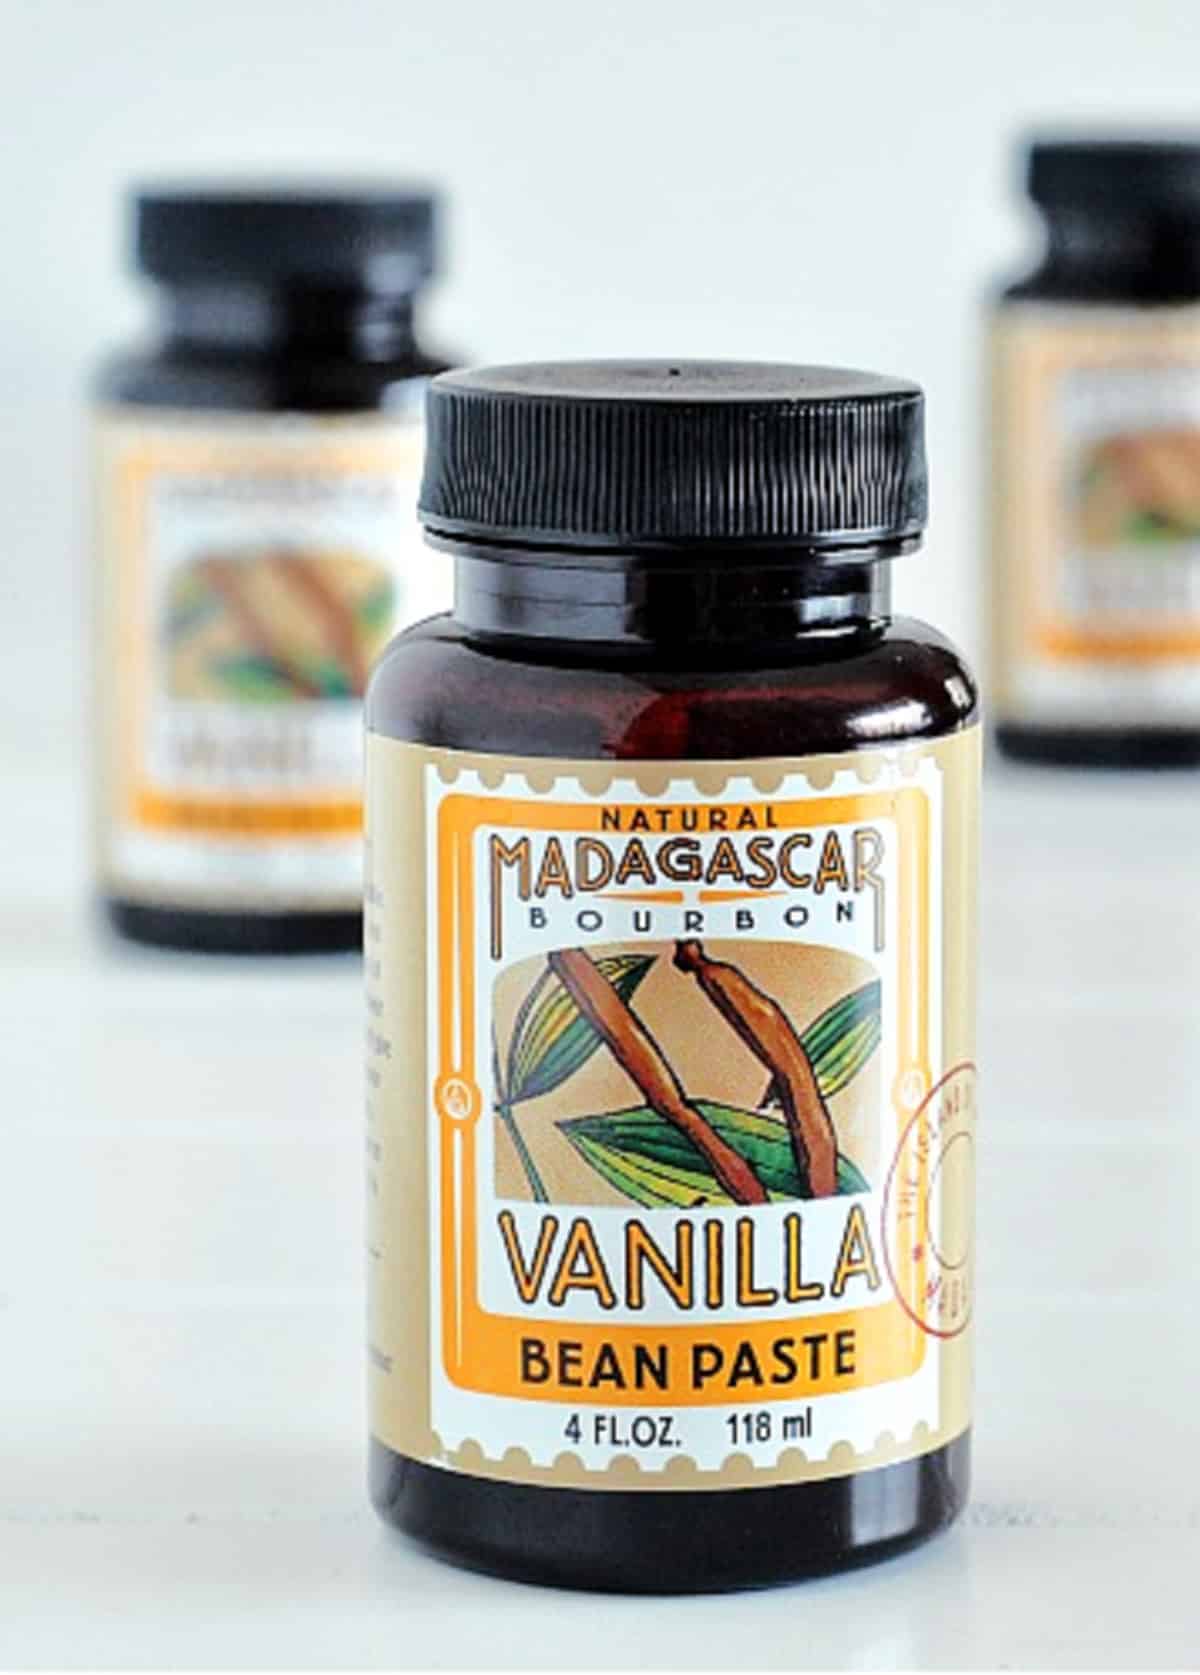 Three jars of vanilla bean paste sit on a white surface; two of the jars are blurred in the background.